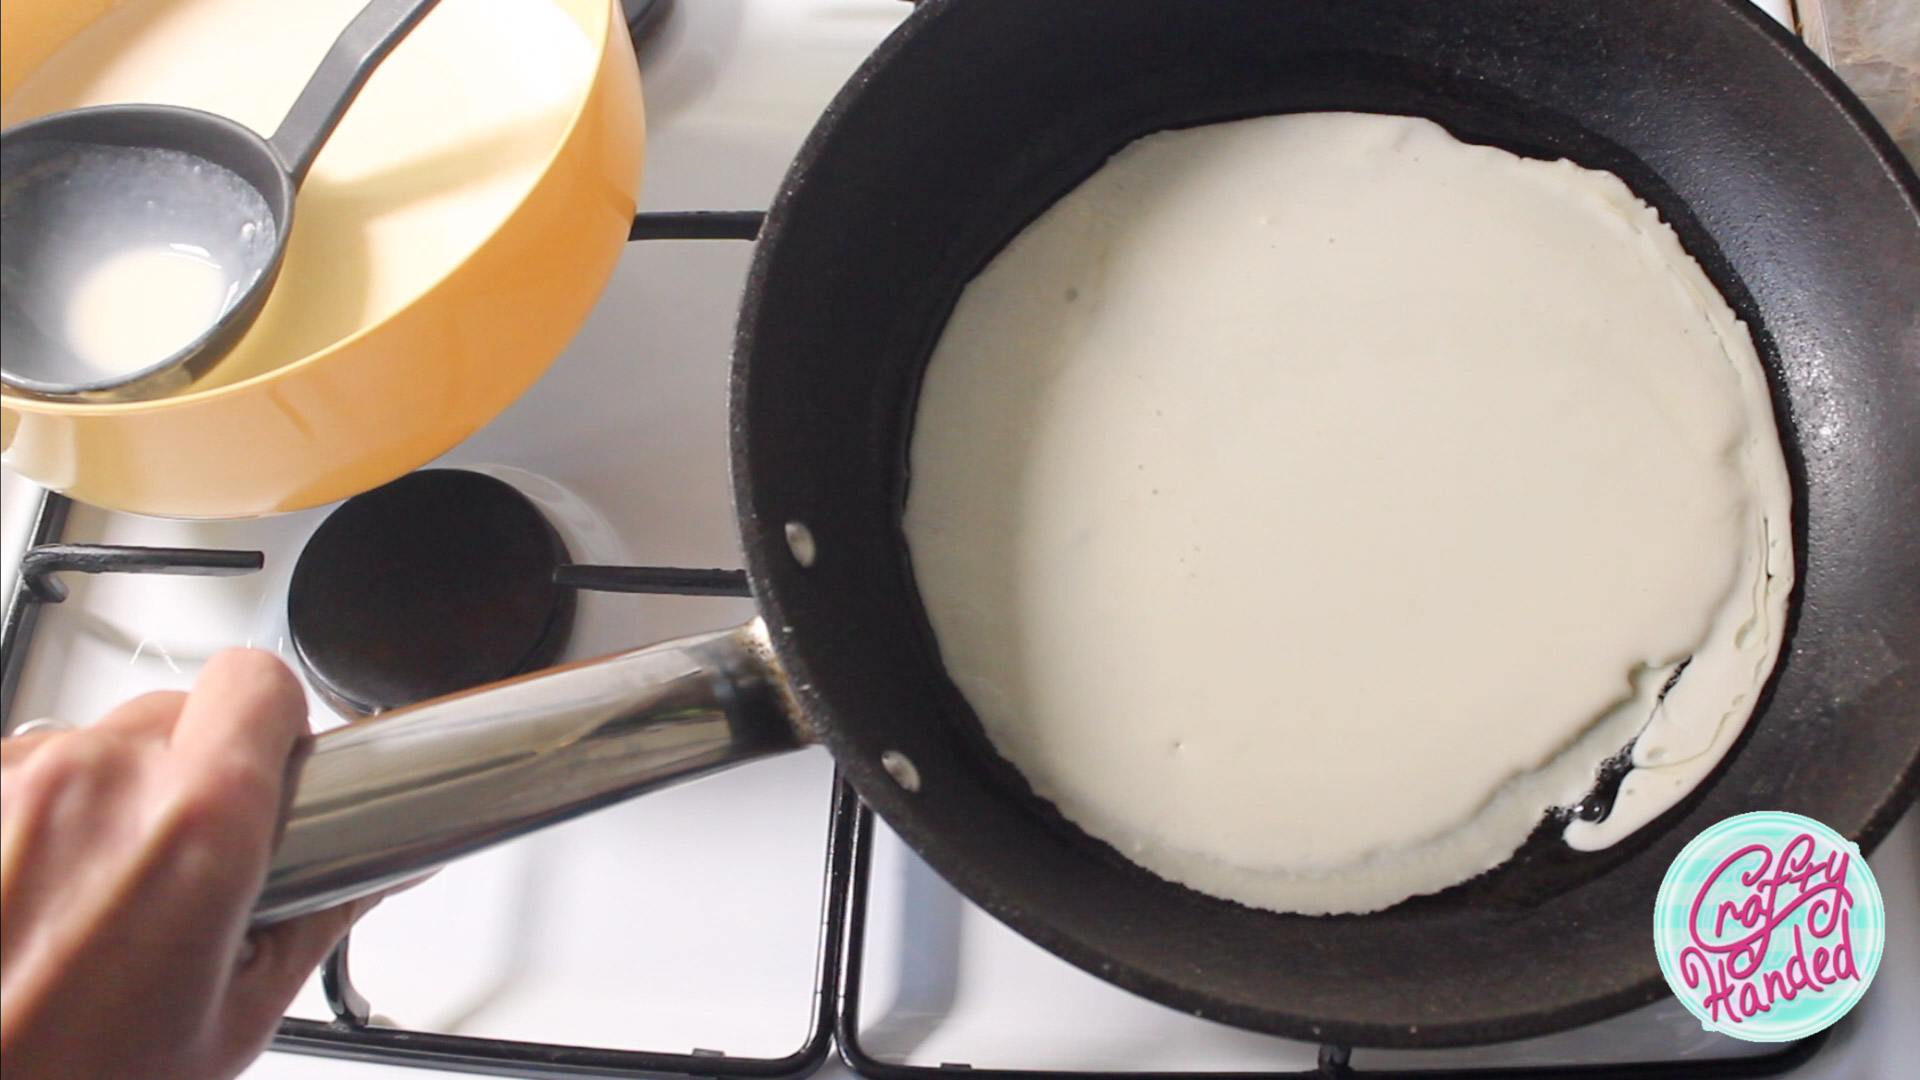 SPread the batter around the pan